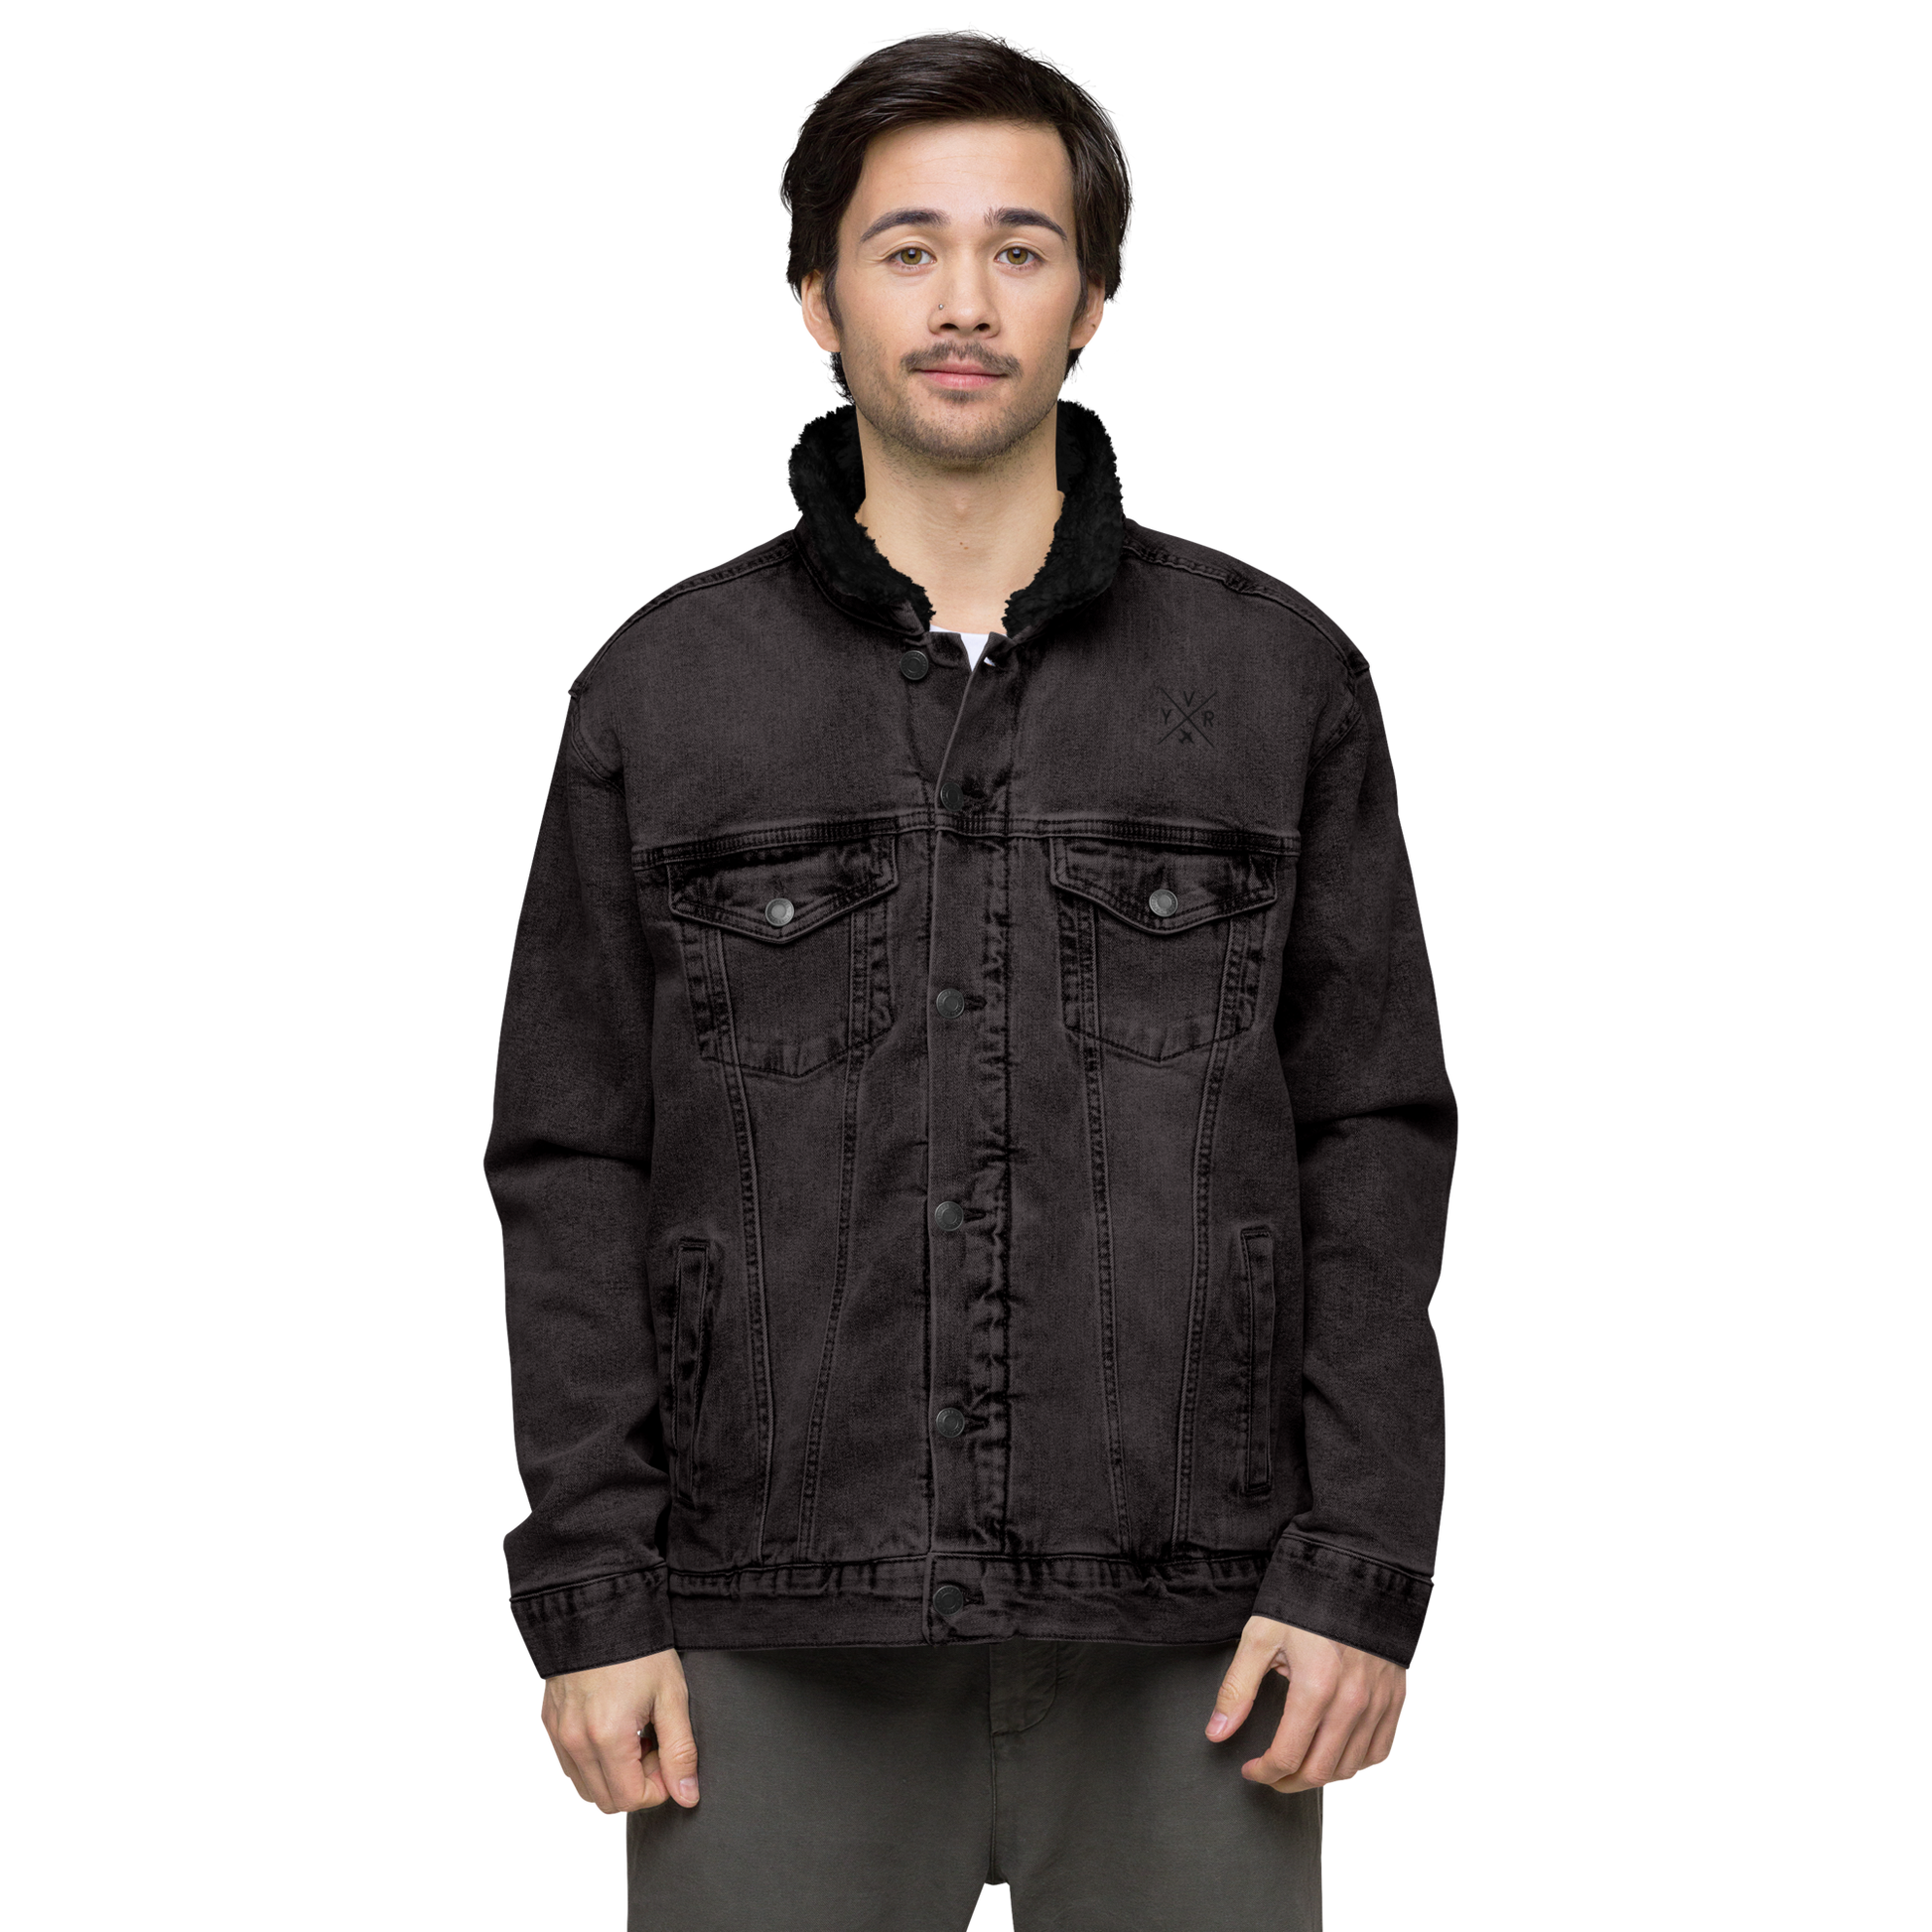 YHM Designs - YVR Vancouver Denim Sherpa Jacket - Crossed-X Design with Airport Code and Vintage Propliner - Black & White Embroidery - Image 04